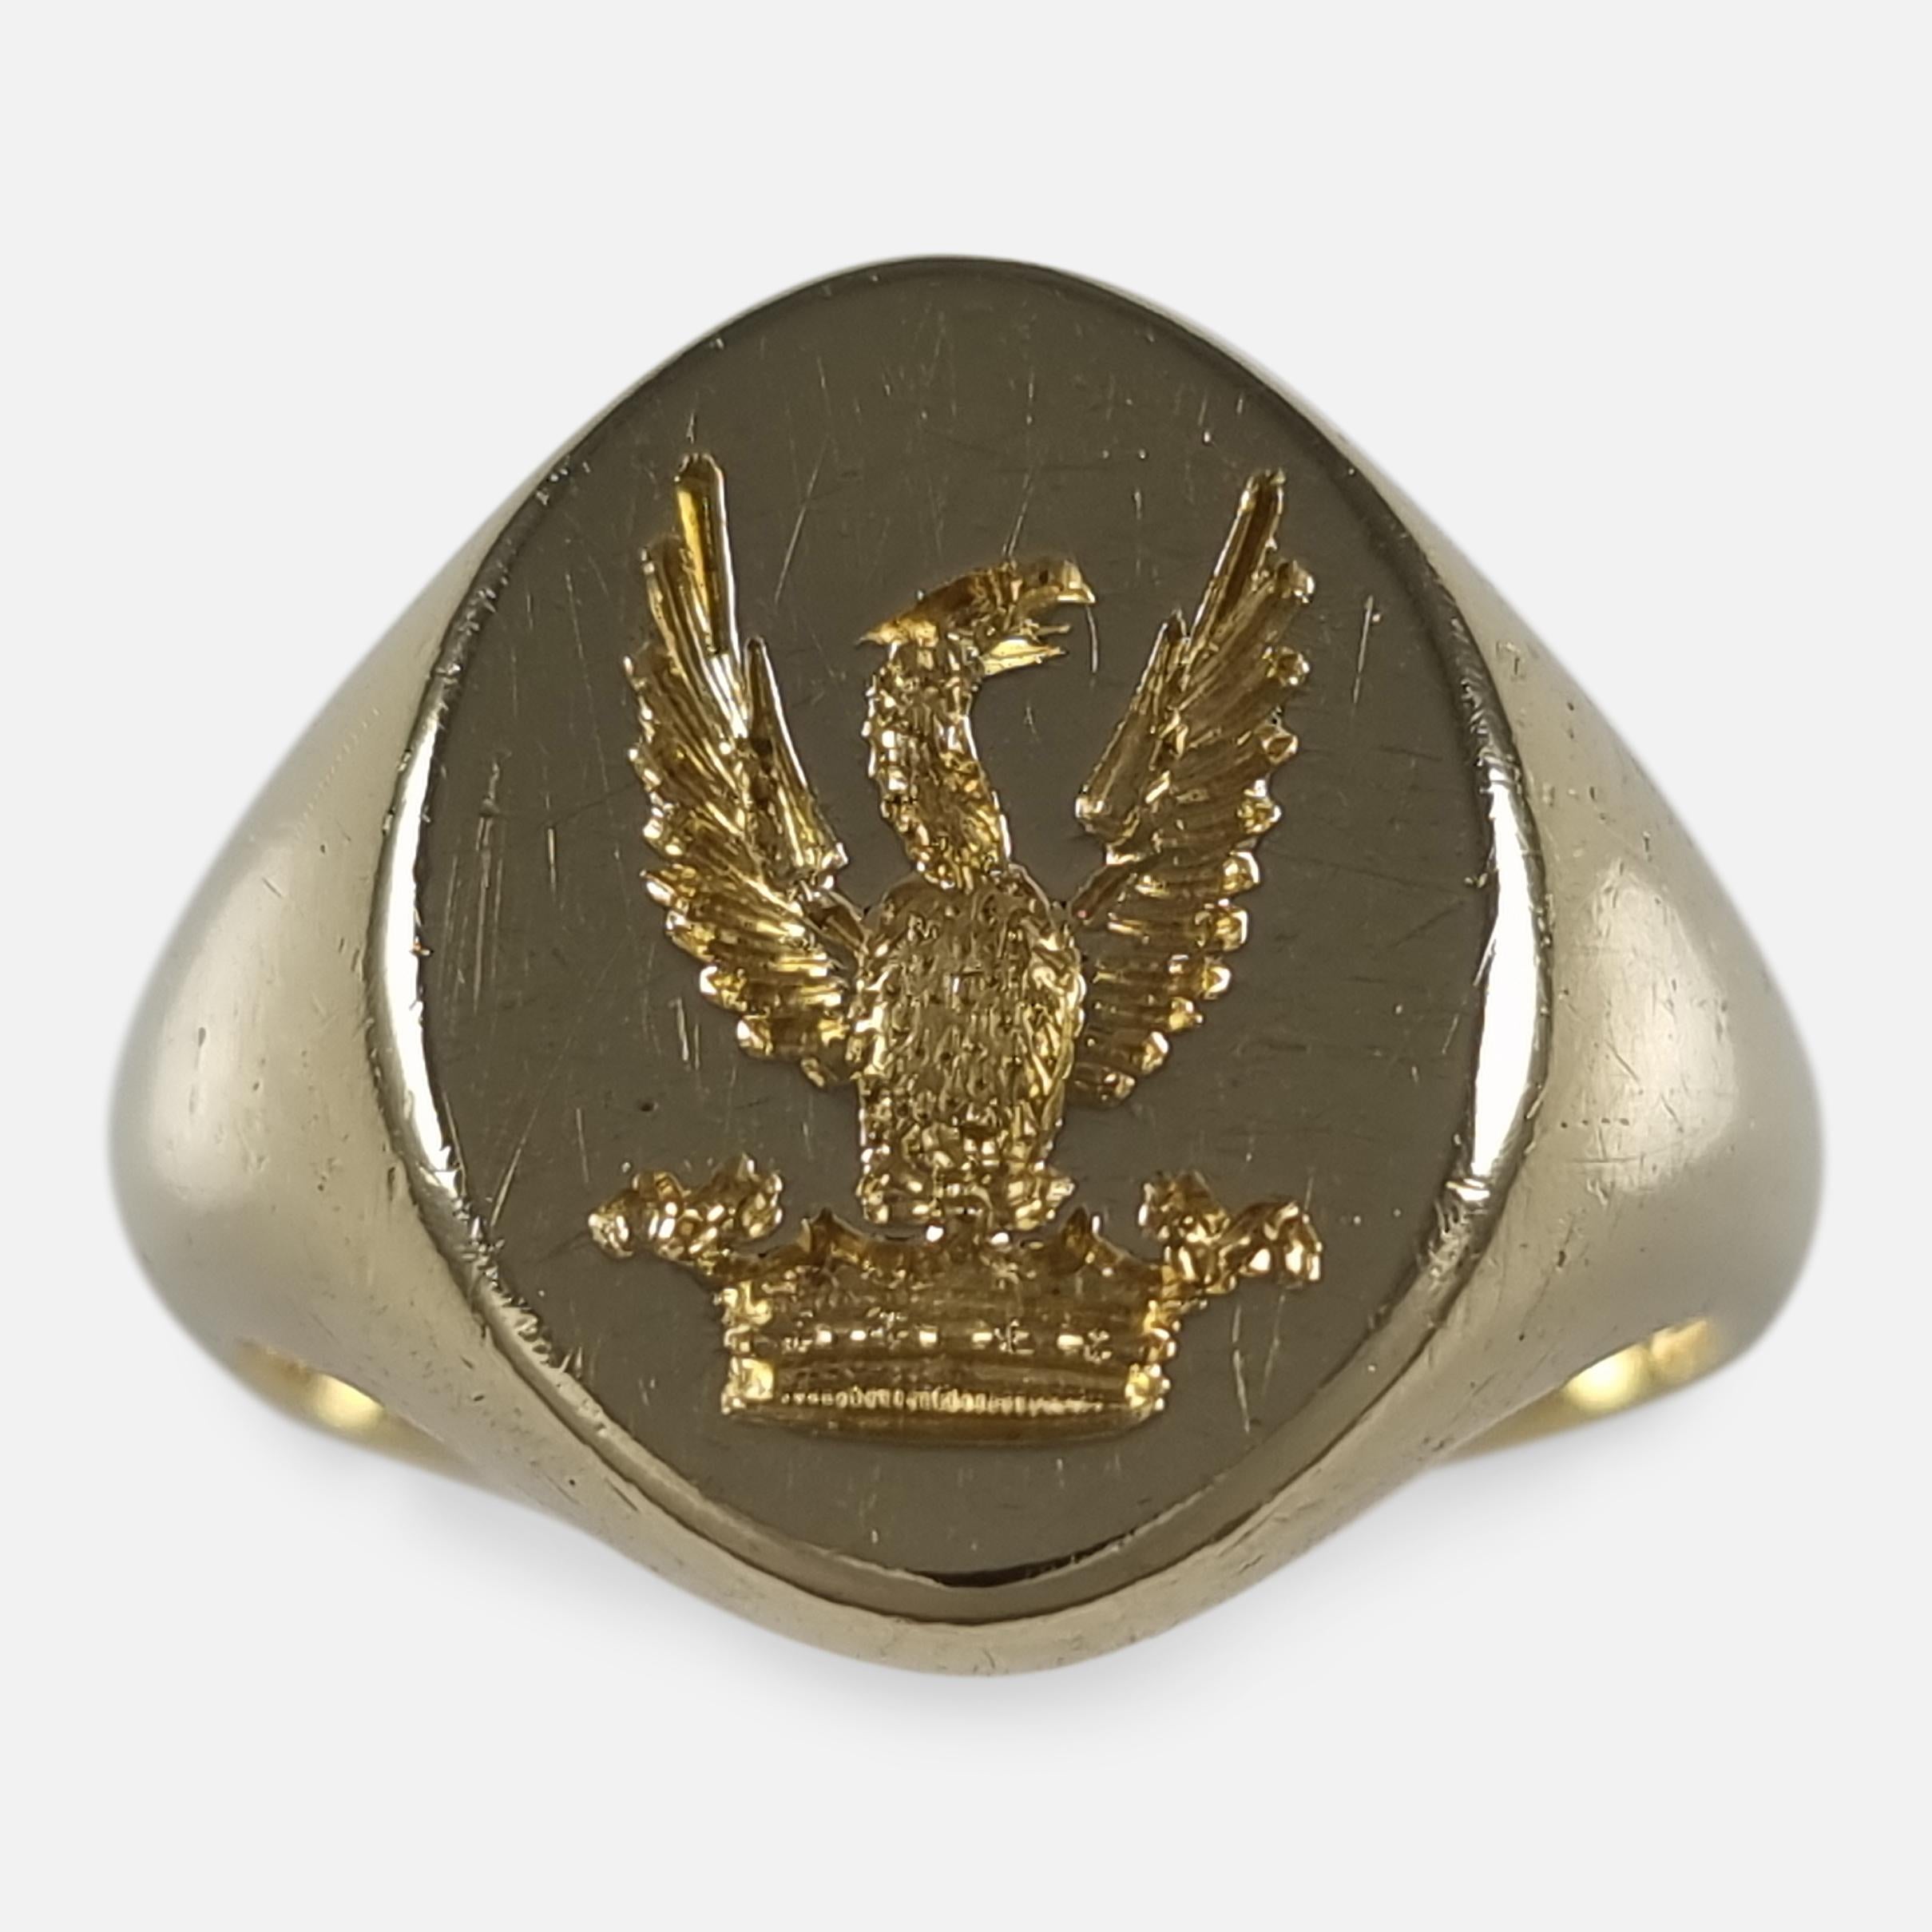 An Elizabeth II 18ct yellow gold signet ring. The signet ring is of oval form to the head with engraved intaglio of a bird above a coronet, and plain shank.

The ring is hallmarked with Birmingham assay office marks, the date letter 'O' to denote